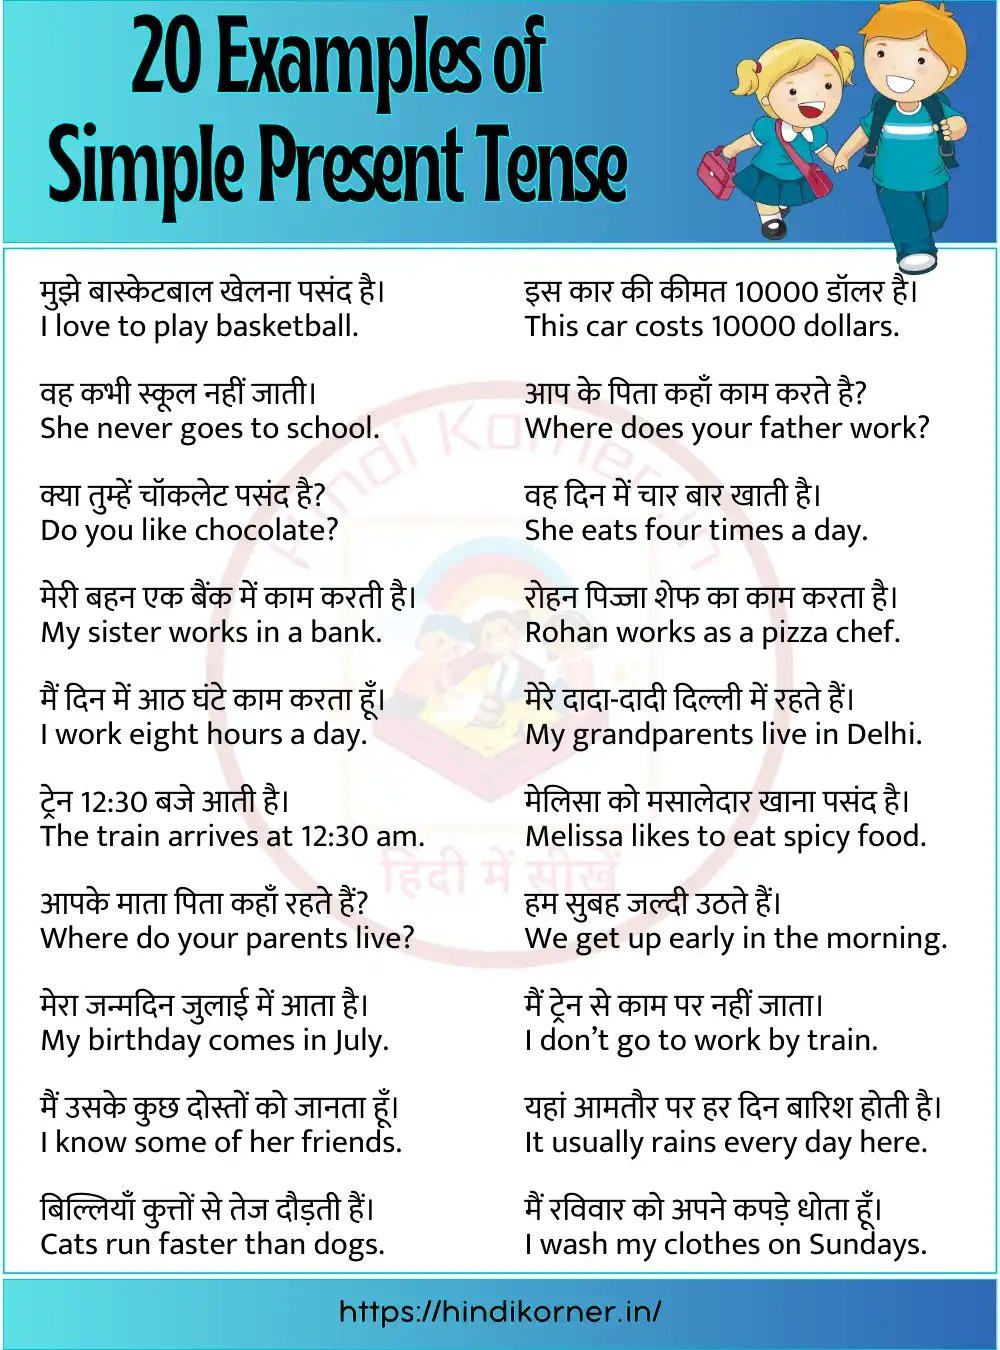 20 Examples of Simple Present Tense In Hindi to English